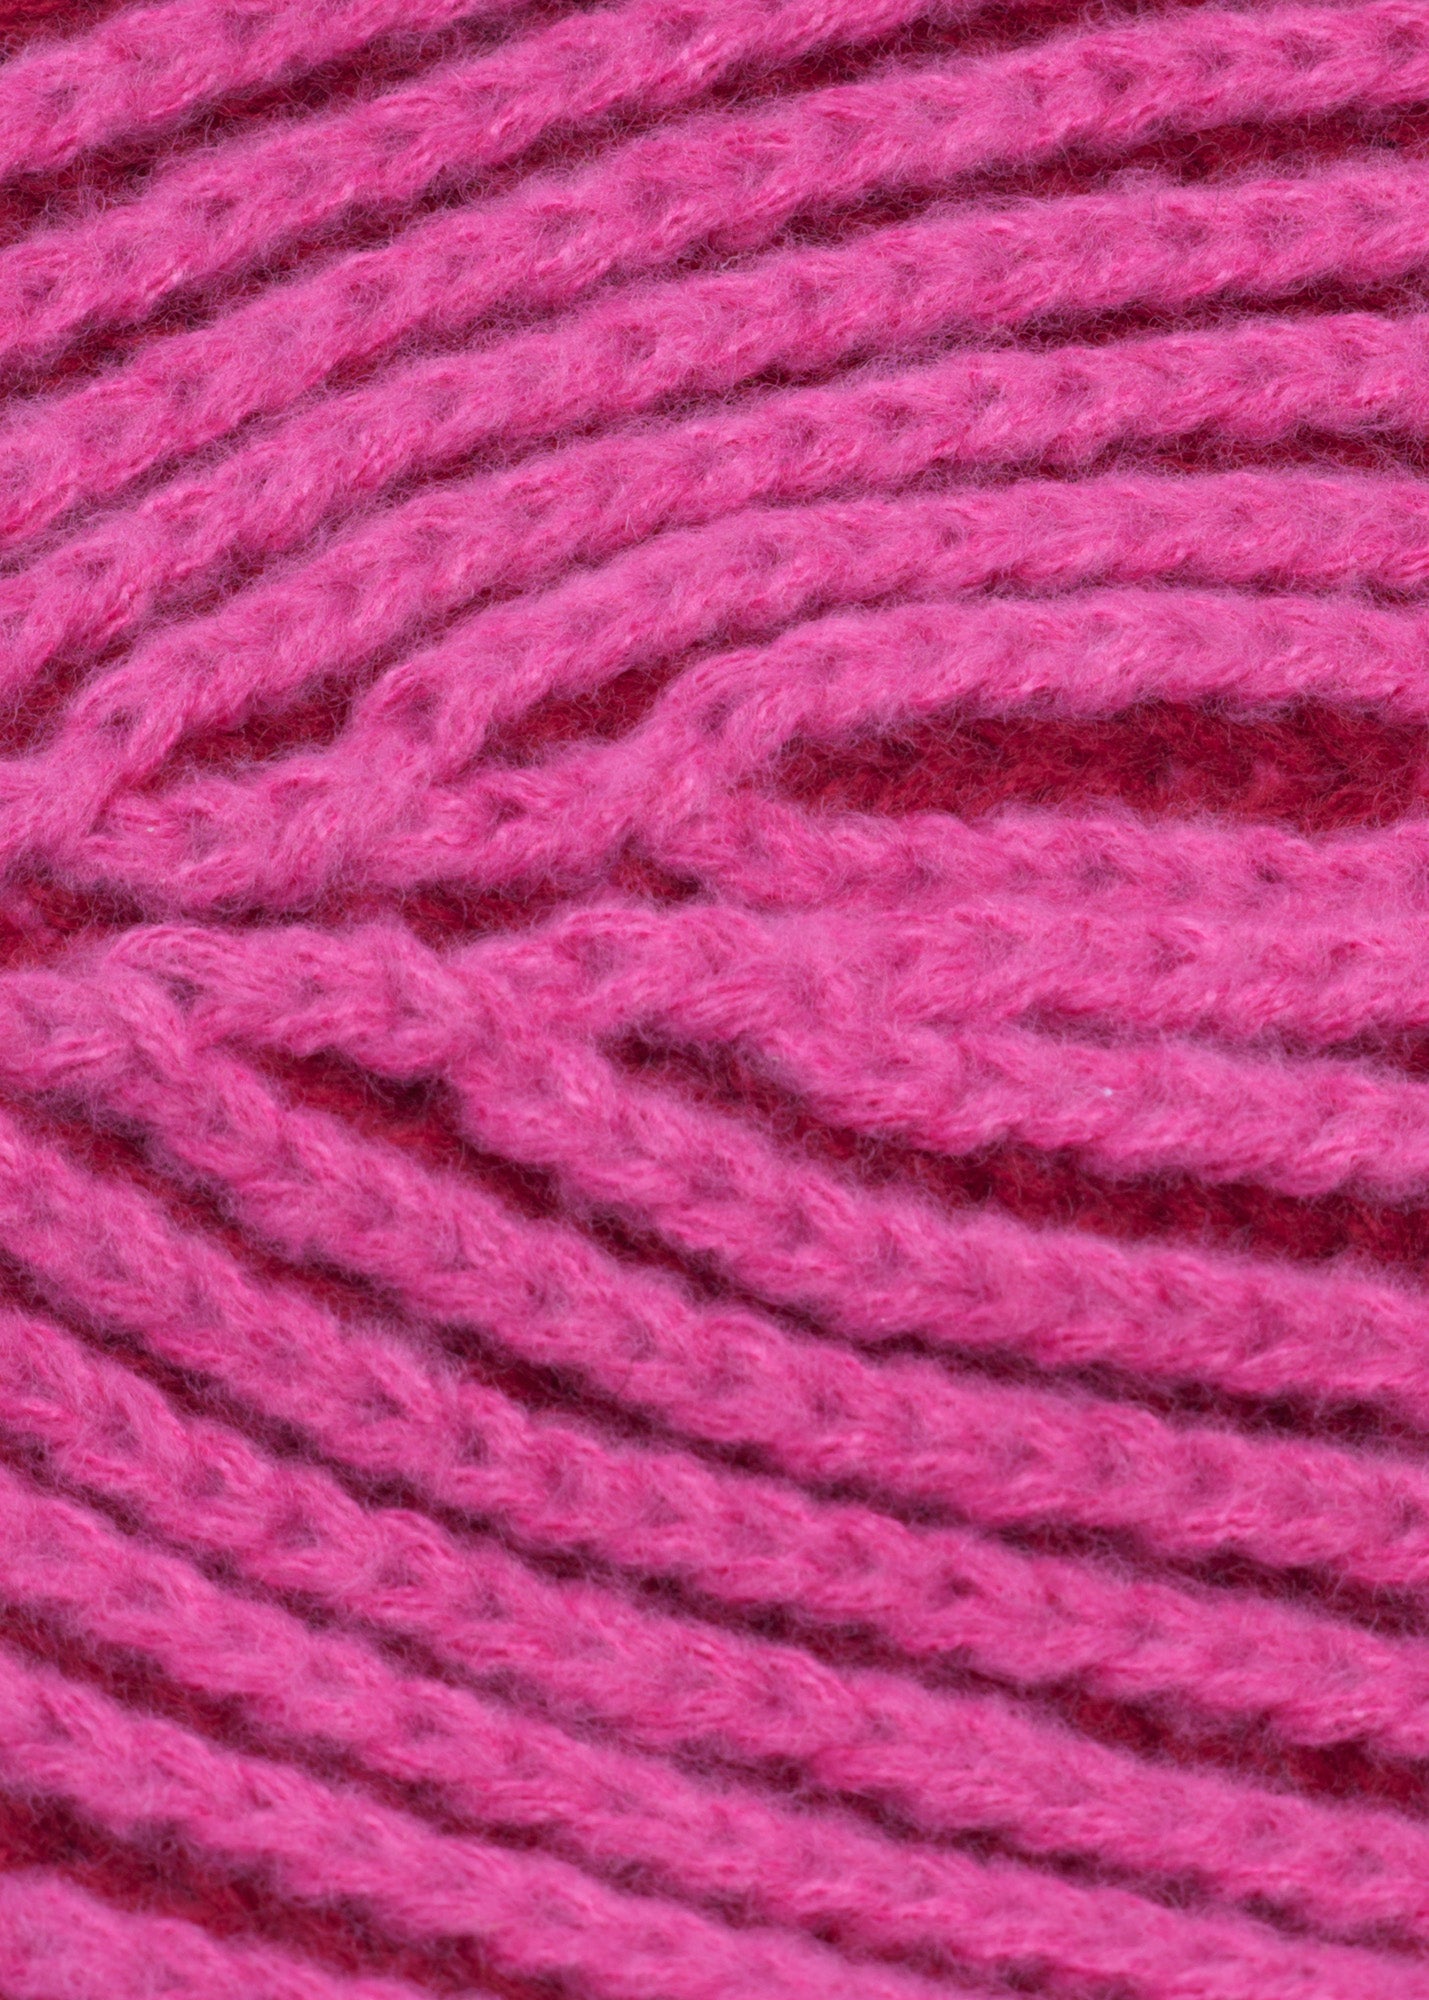 BEFORE Chunky Knit Hat Pink/Red